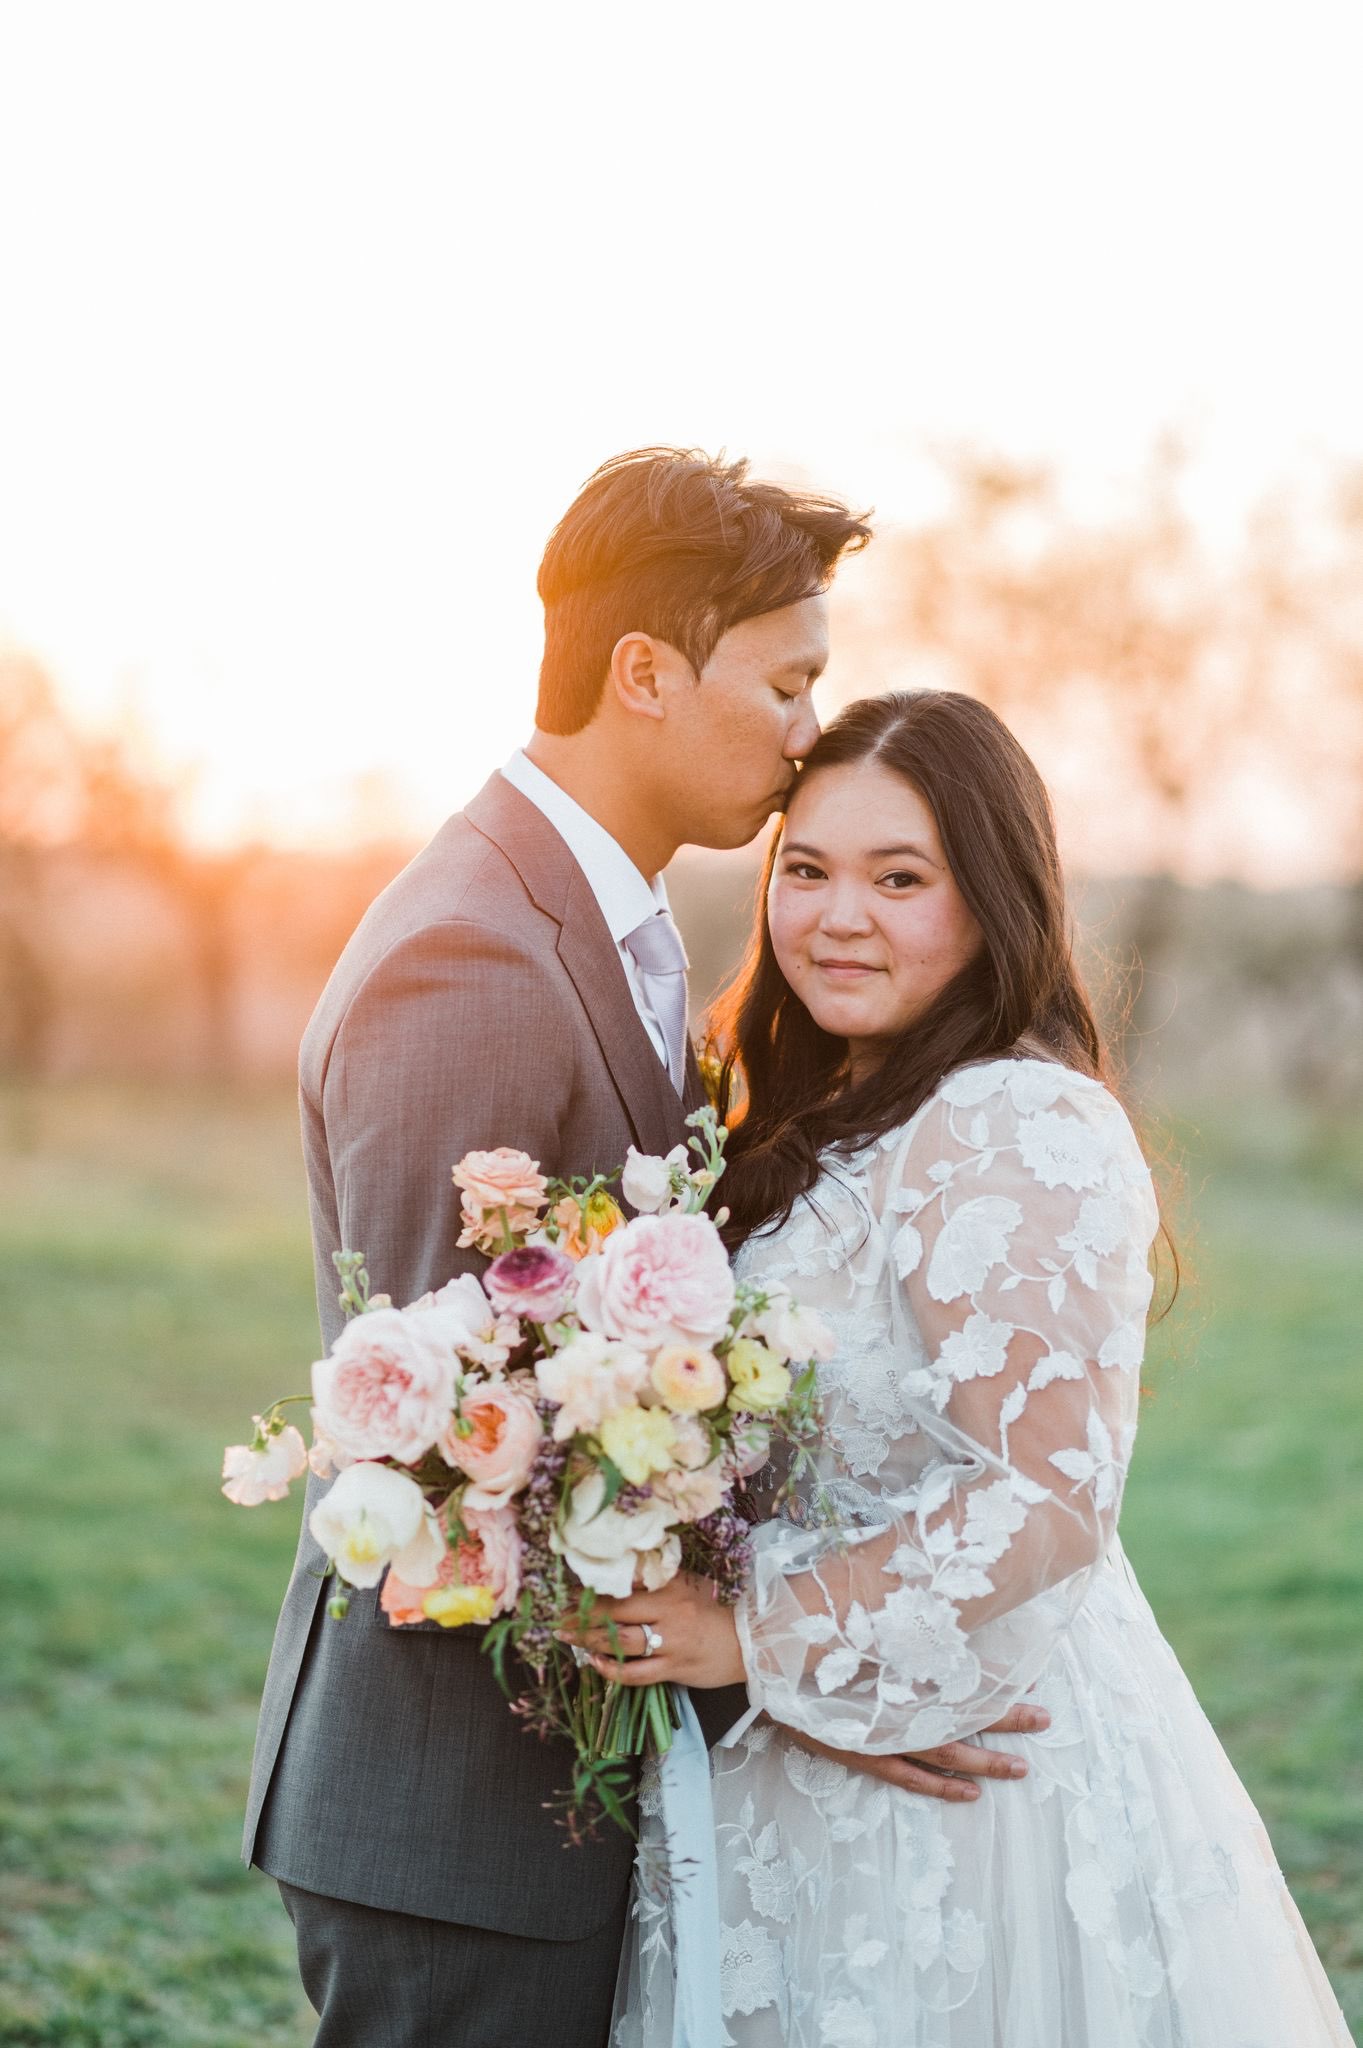 sunset photo of a bride and groom with a pastel bridal bouquet